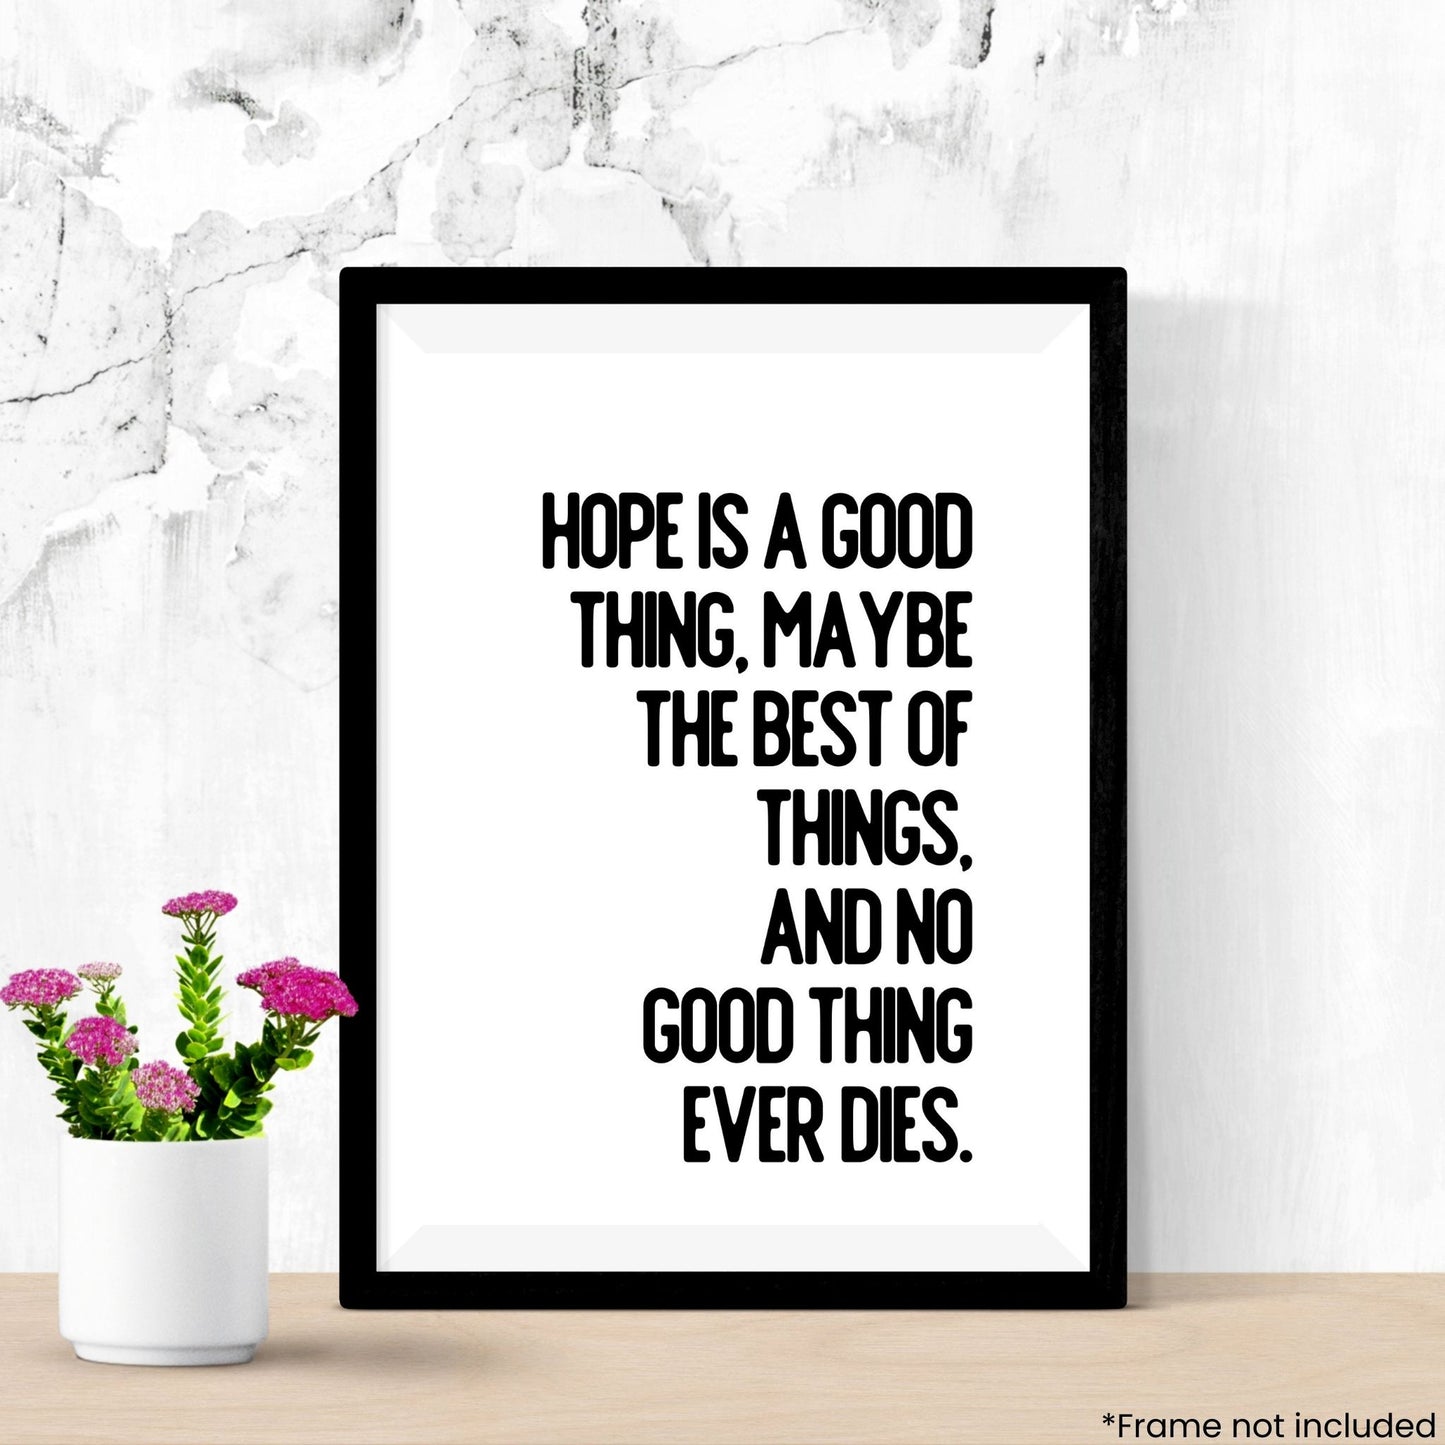 hope-is-a-good-thing in frame